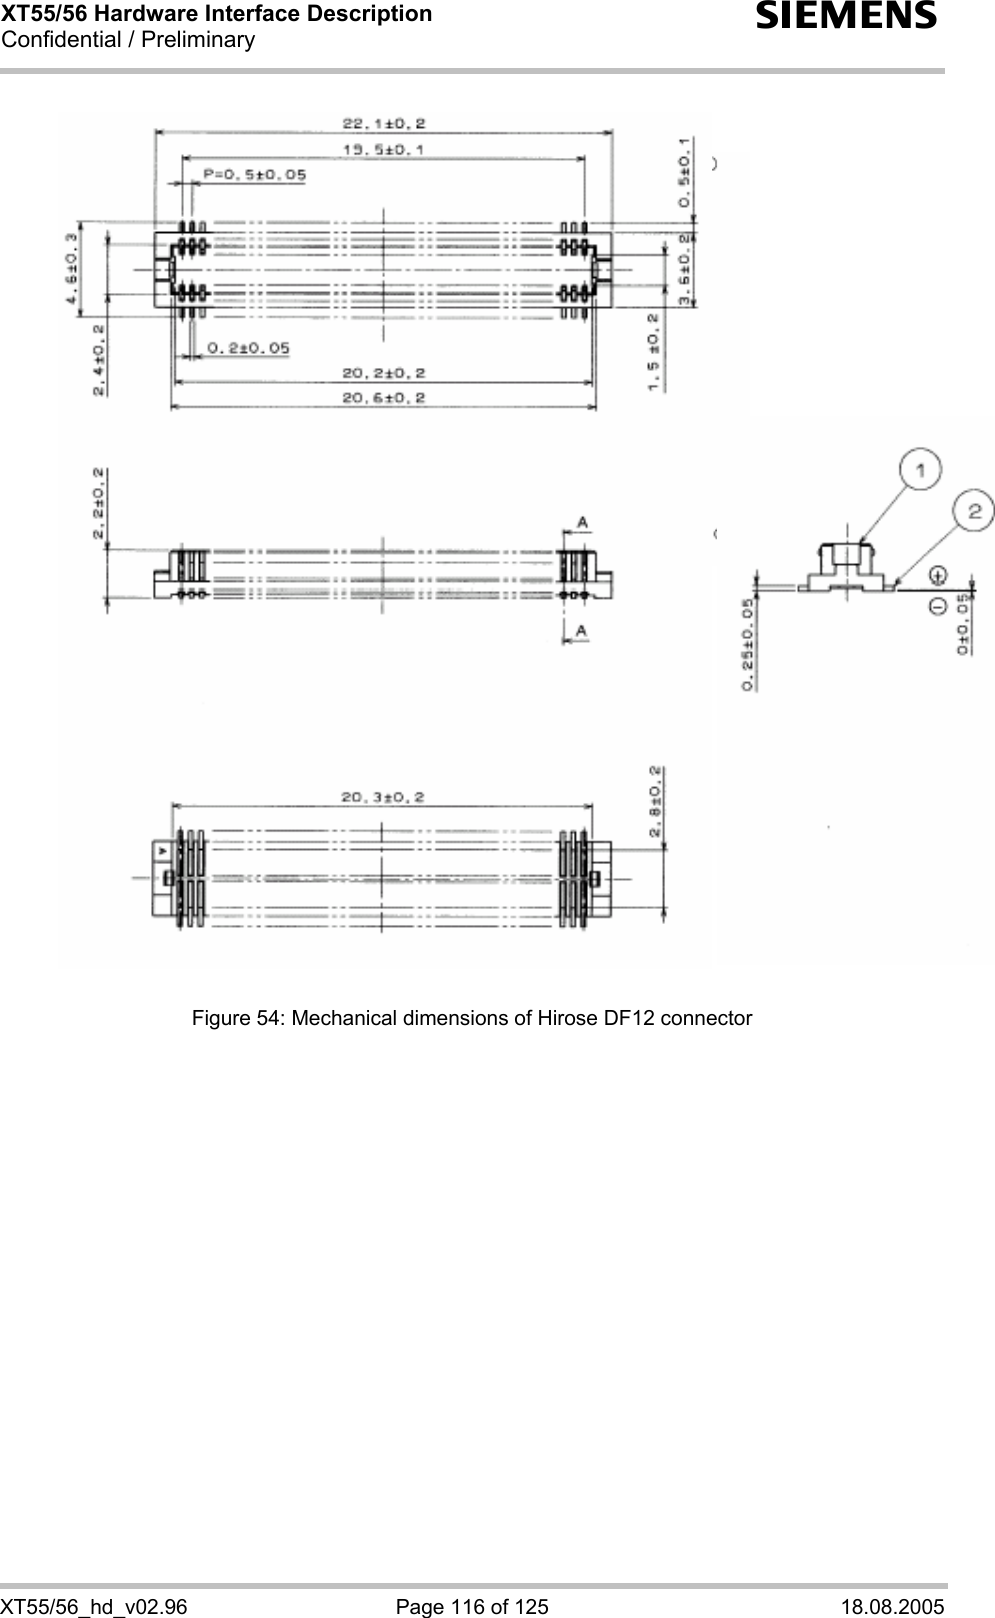 XT55/56 Hardware Interface Description Confidential / Preliminary s XT55/56_hd_v02.96  Page 116 of 125  18.08.2005      Figure 54: Mechanical dimensions of Hirose DF12 connector 